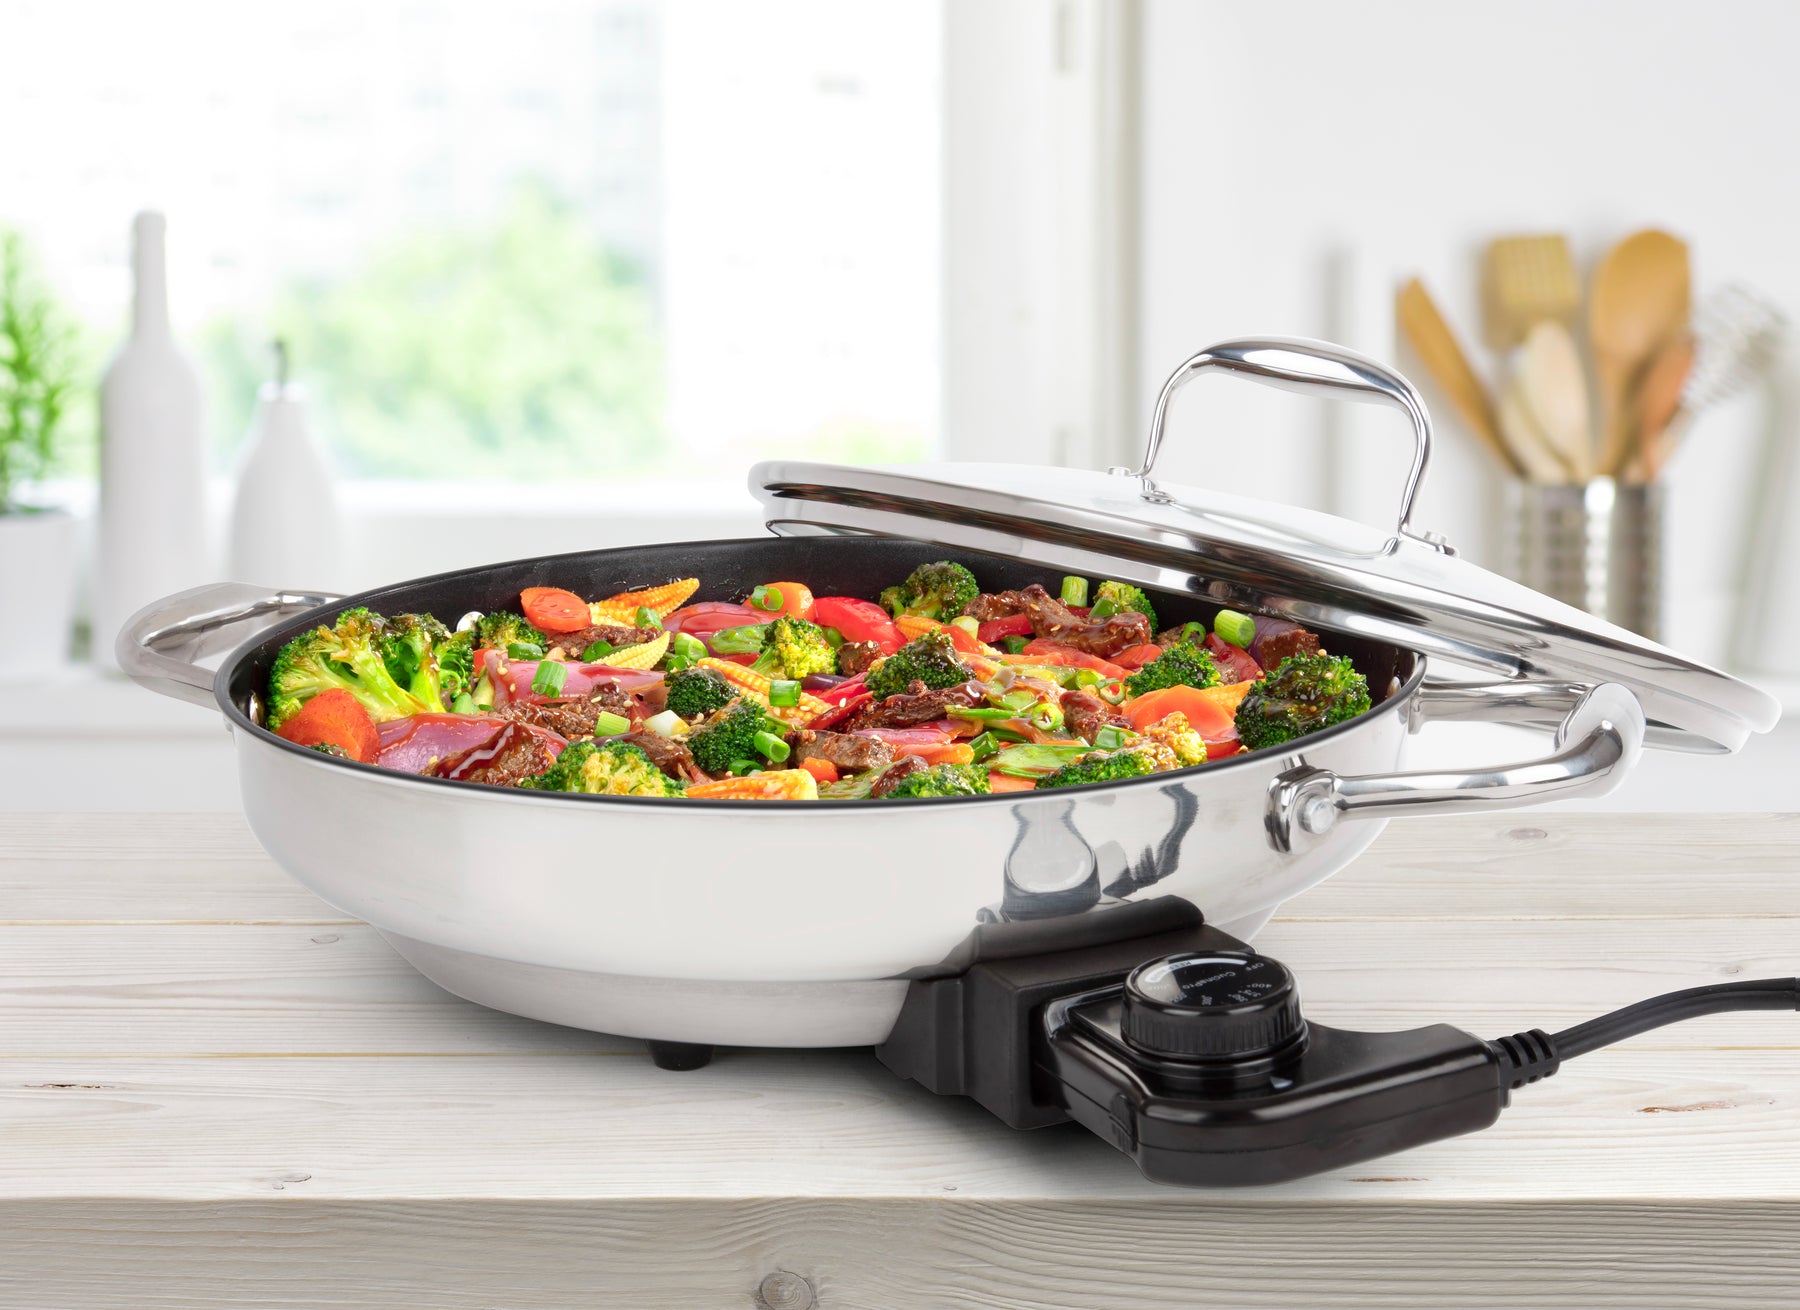 Stainless Steel Electric Skillet, 12 in.